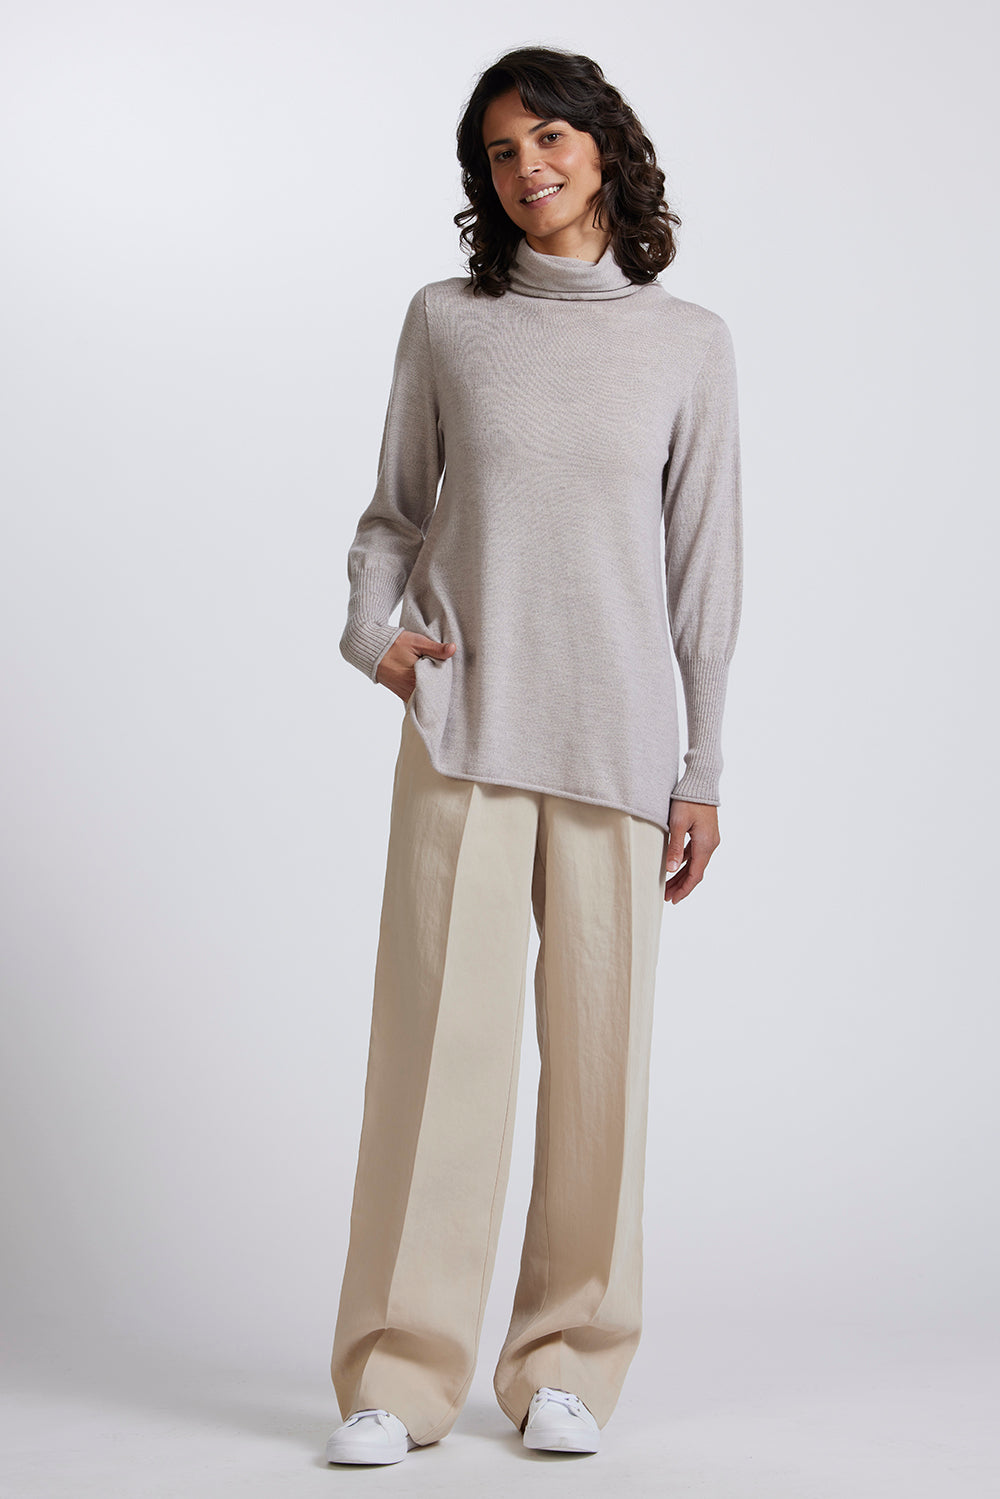 A-Line Funnel Neck Sweater in Light Sand by Royal Merino